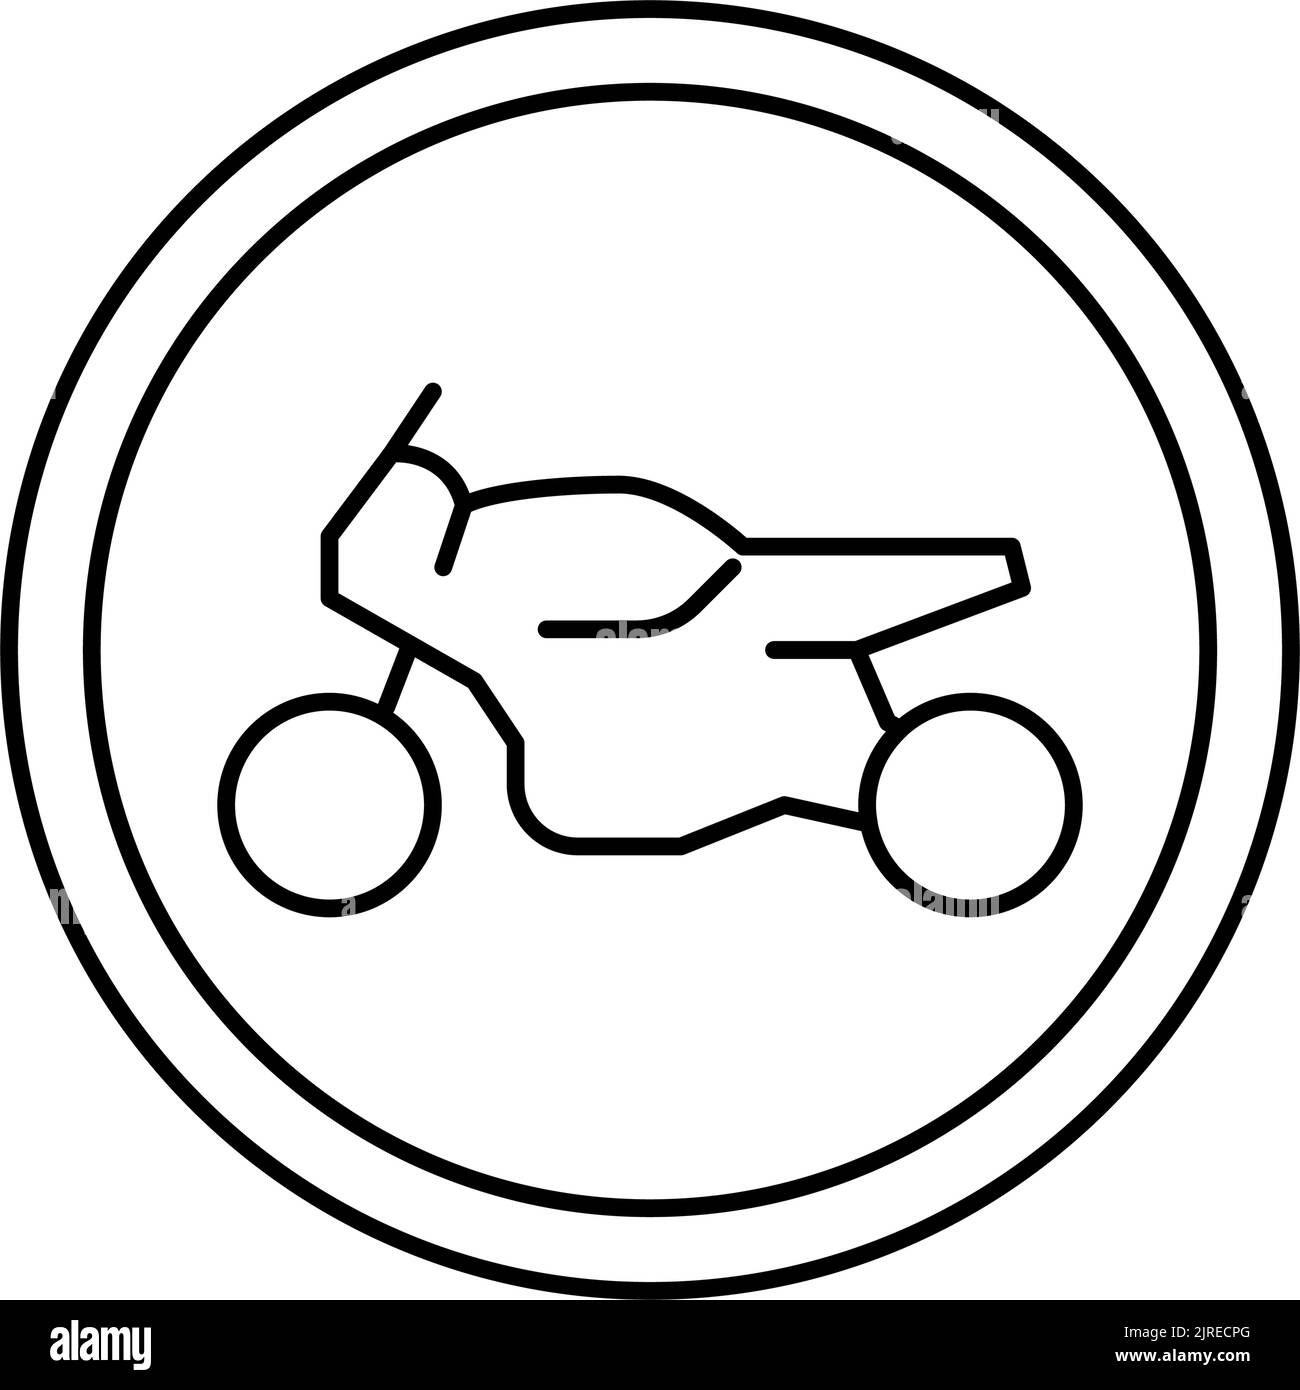 motorcycle road sign line icon vector illustration Stock Vector